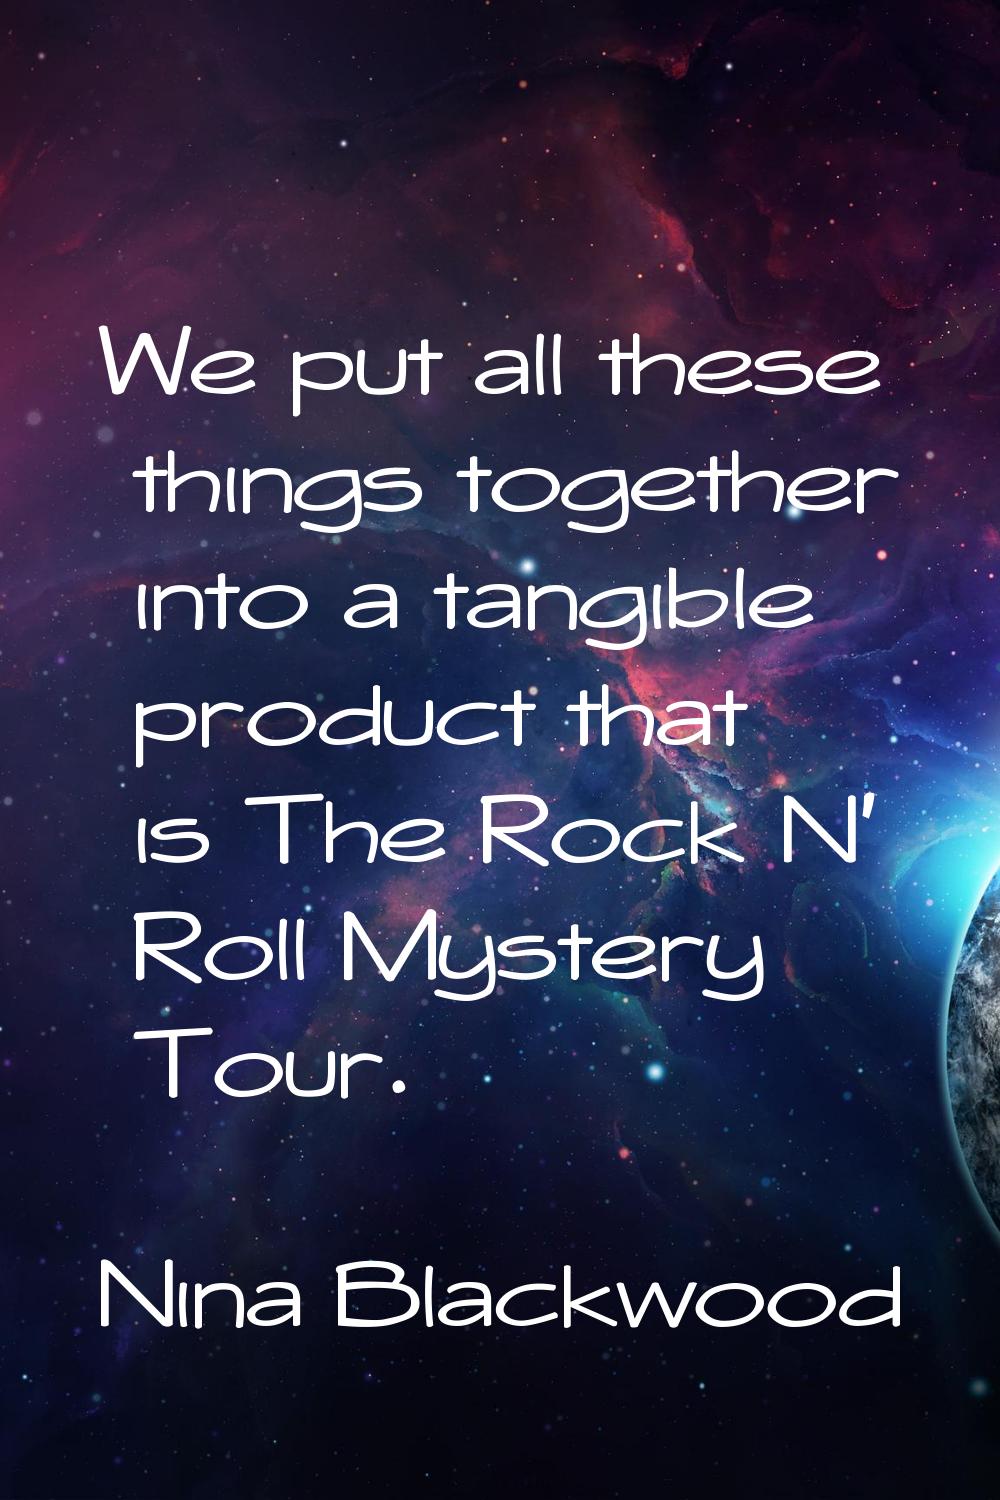 We put all these things together into a tangible product that is The Rock N' Roll Mystery Tour.